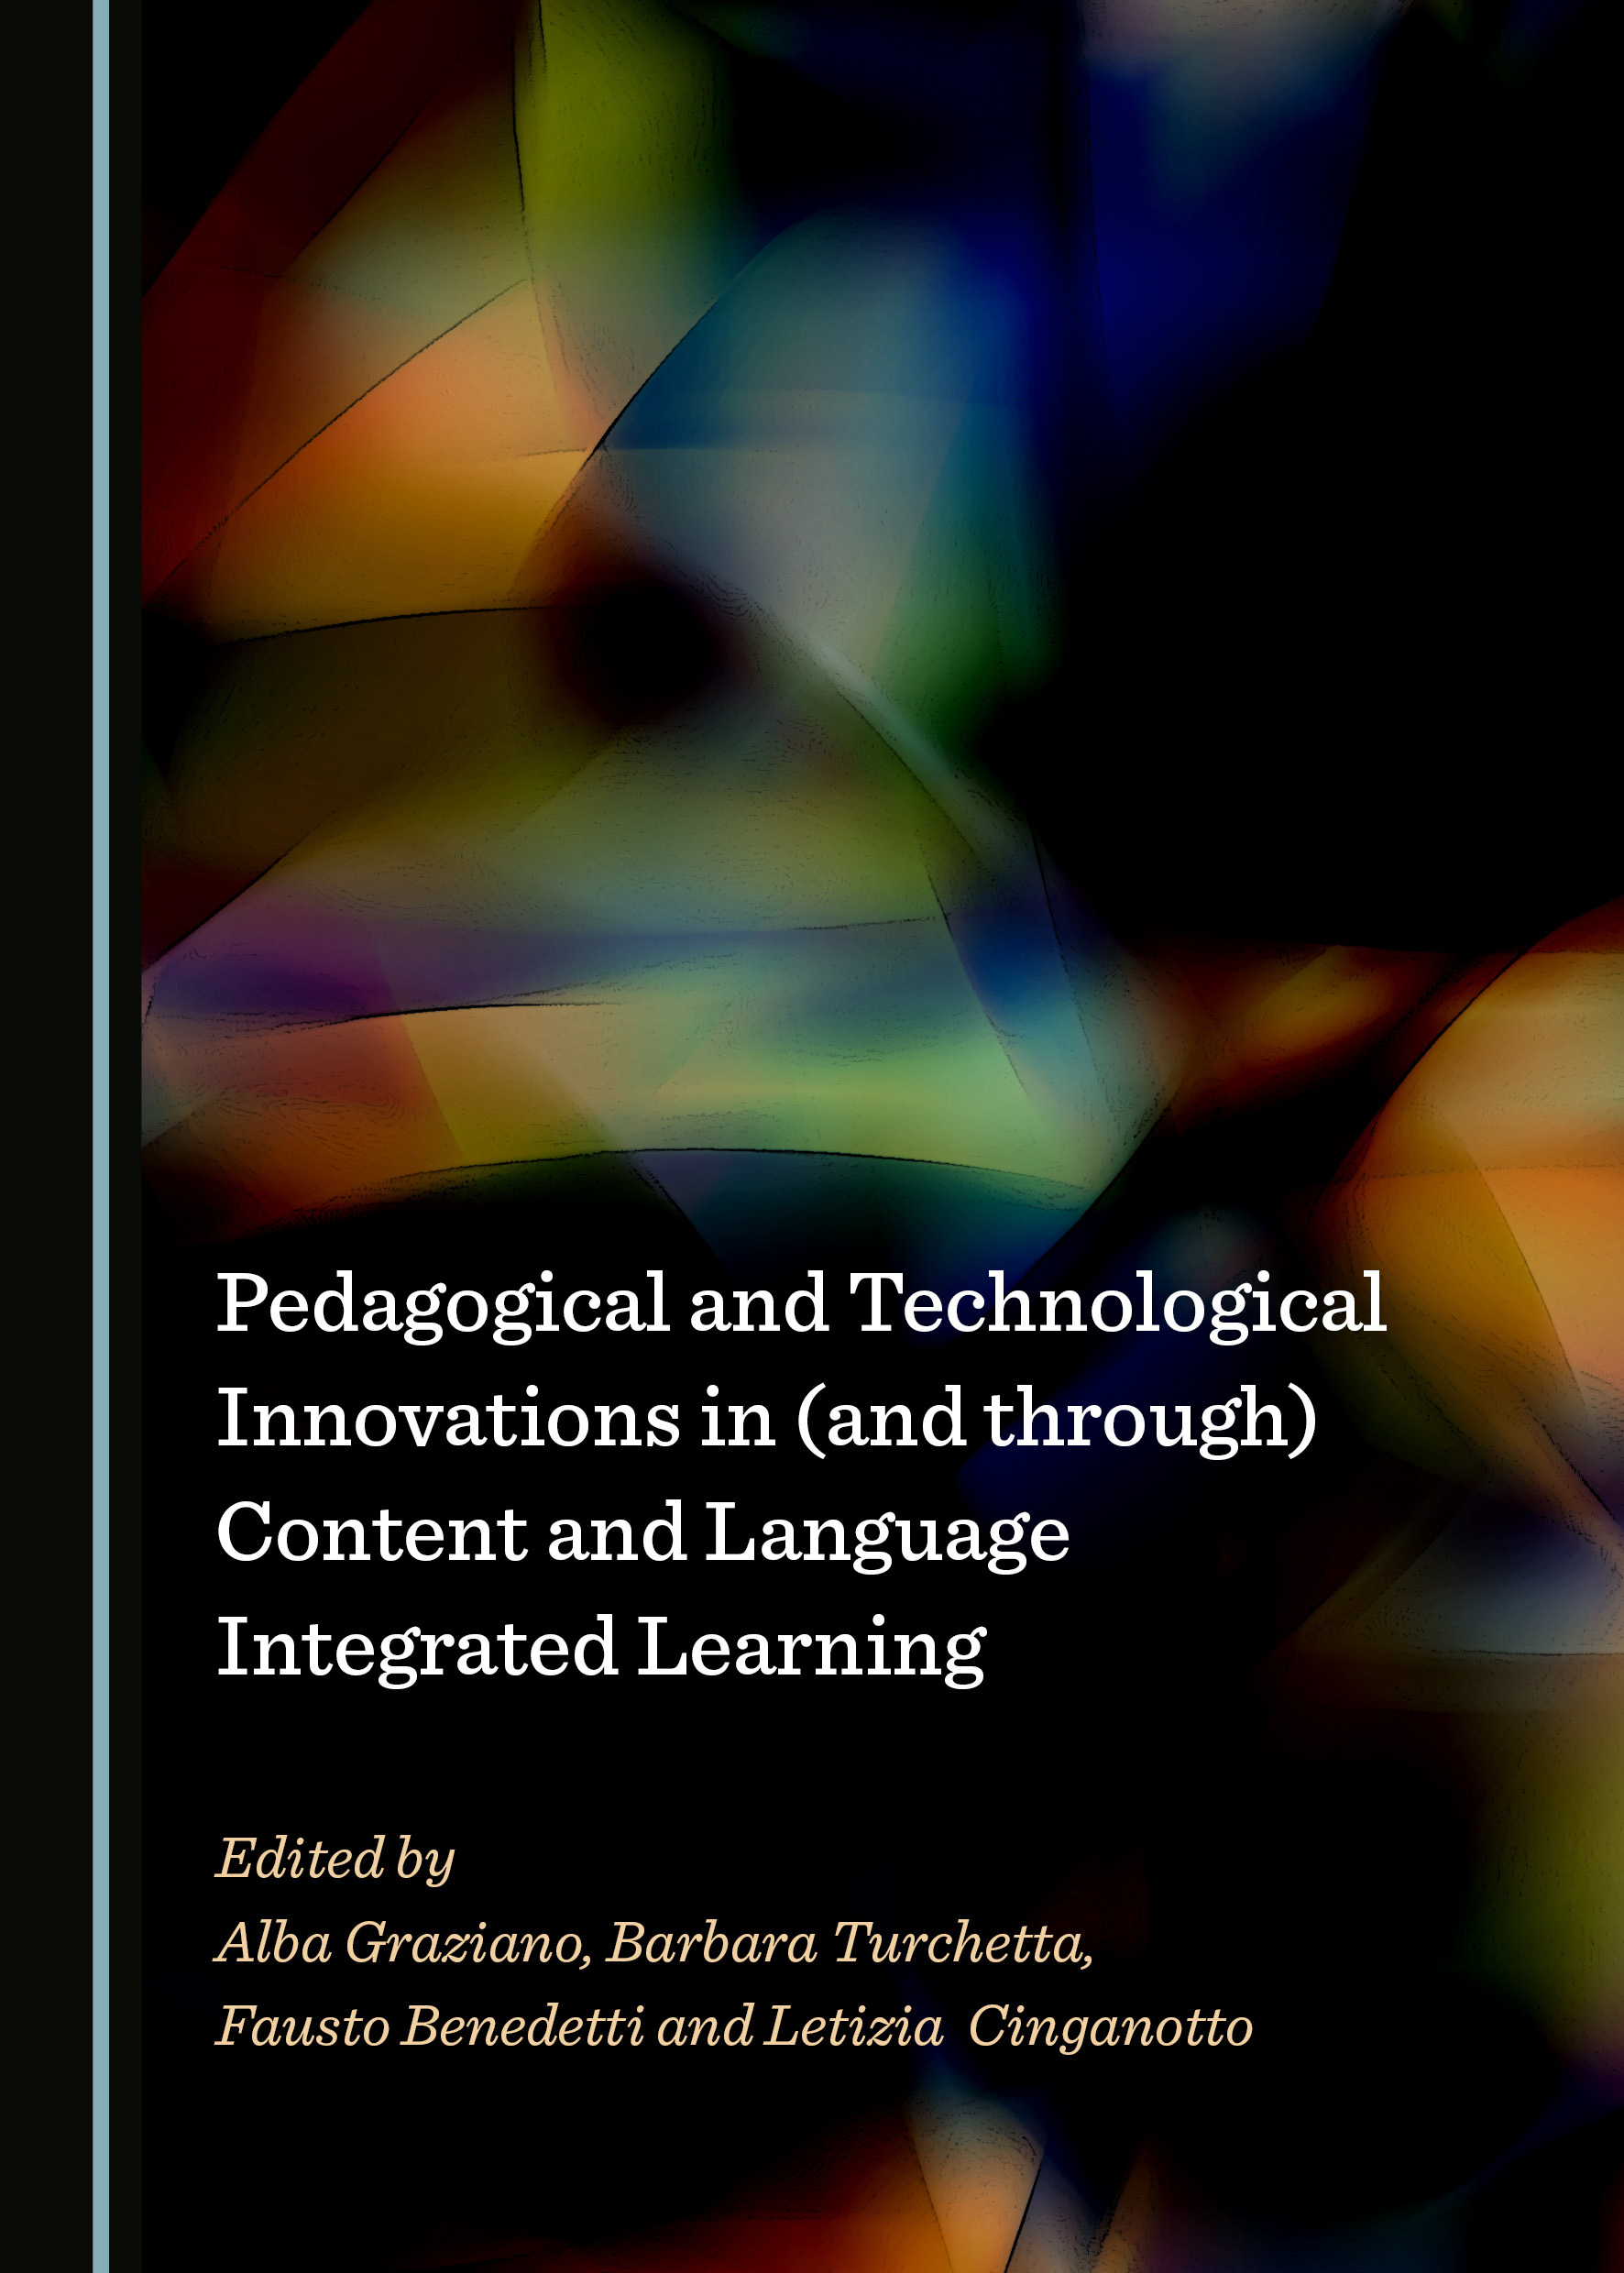 Imagen de portada del libro Pedagogical and Technological Innovations in (and through) Content and LanguageIntegrated Learning